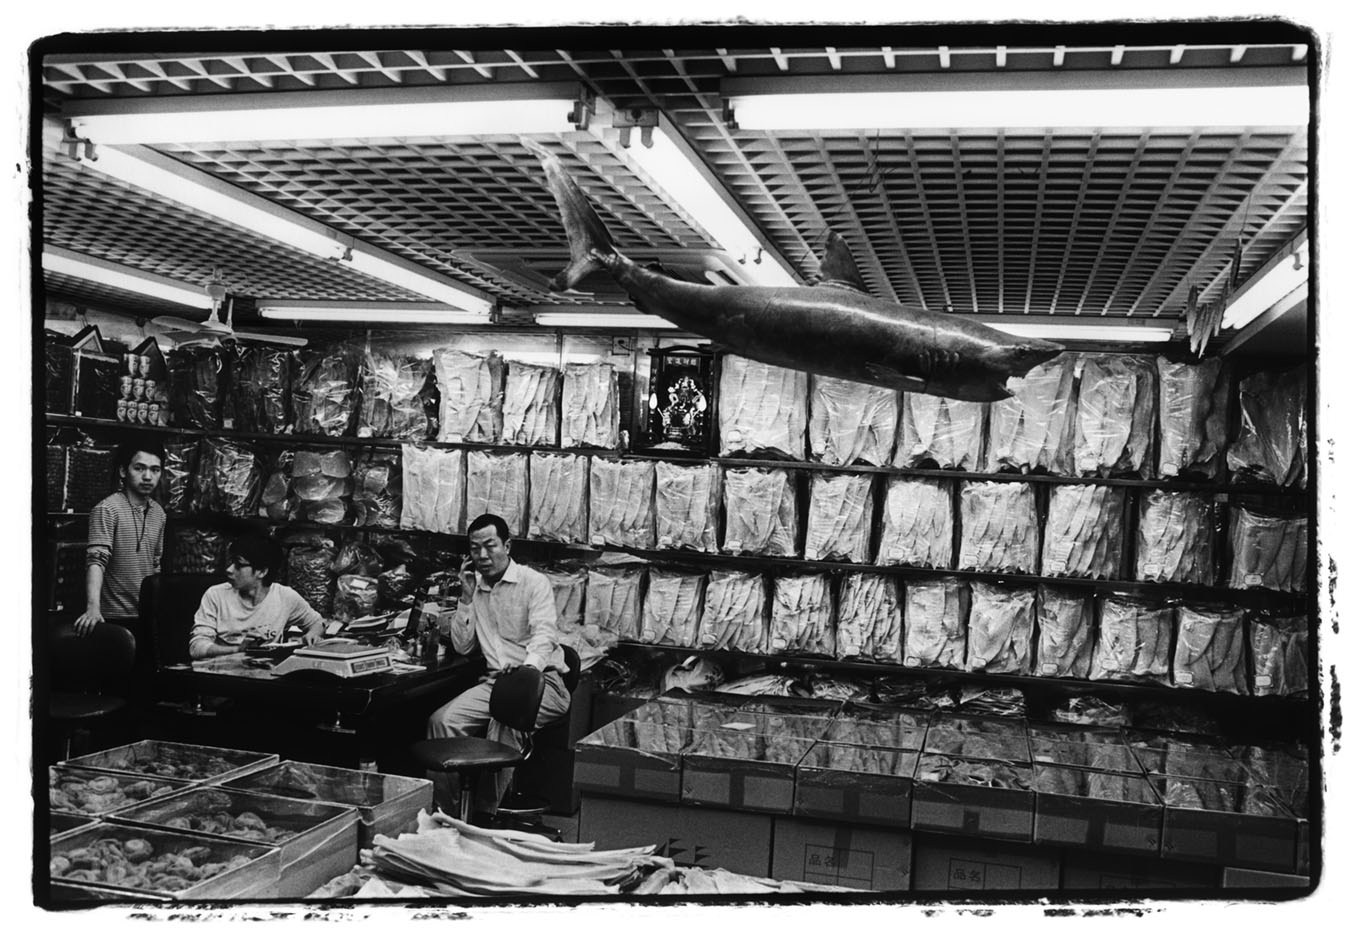 shop selling shark fins in the dried food market in Guangzhou, China. © Patrick Brown - Panos Pictures.